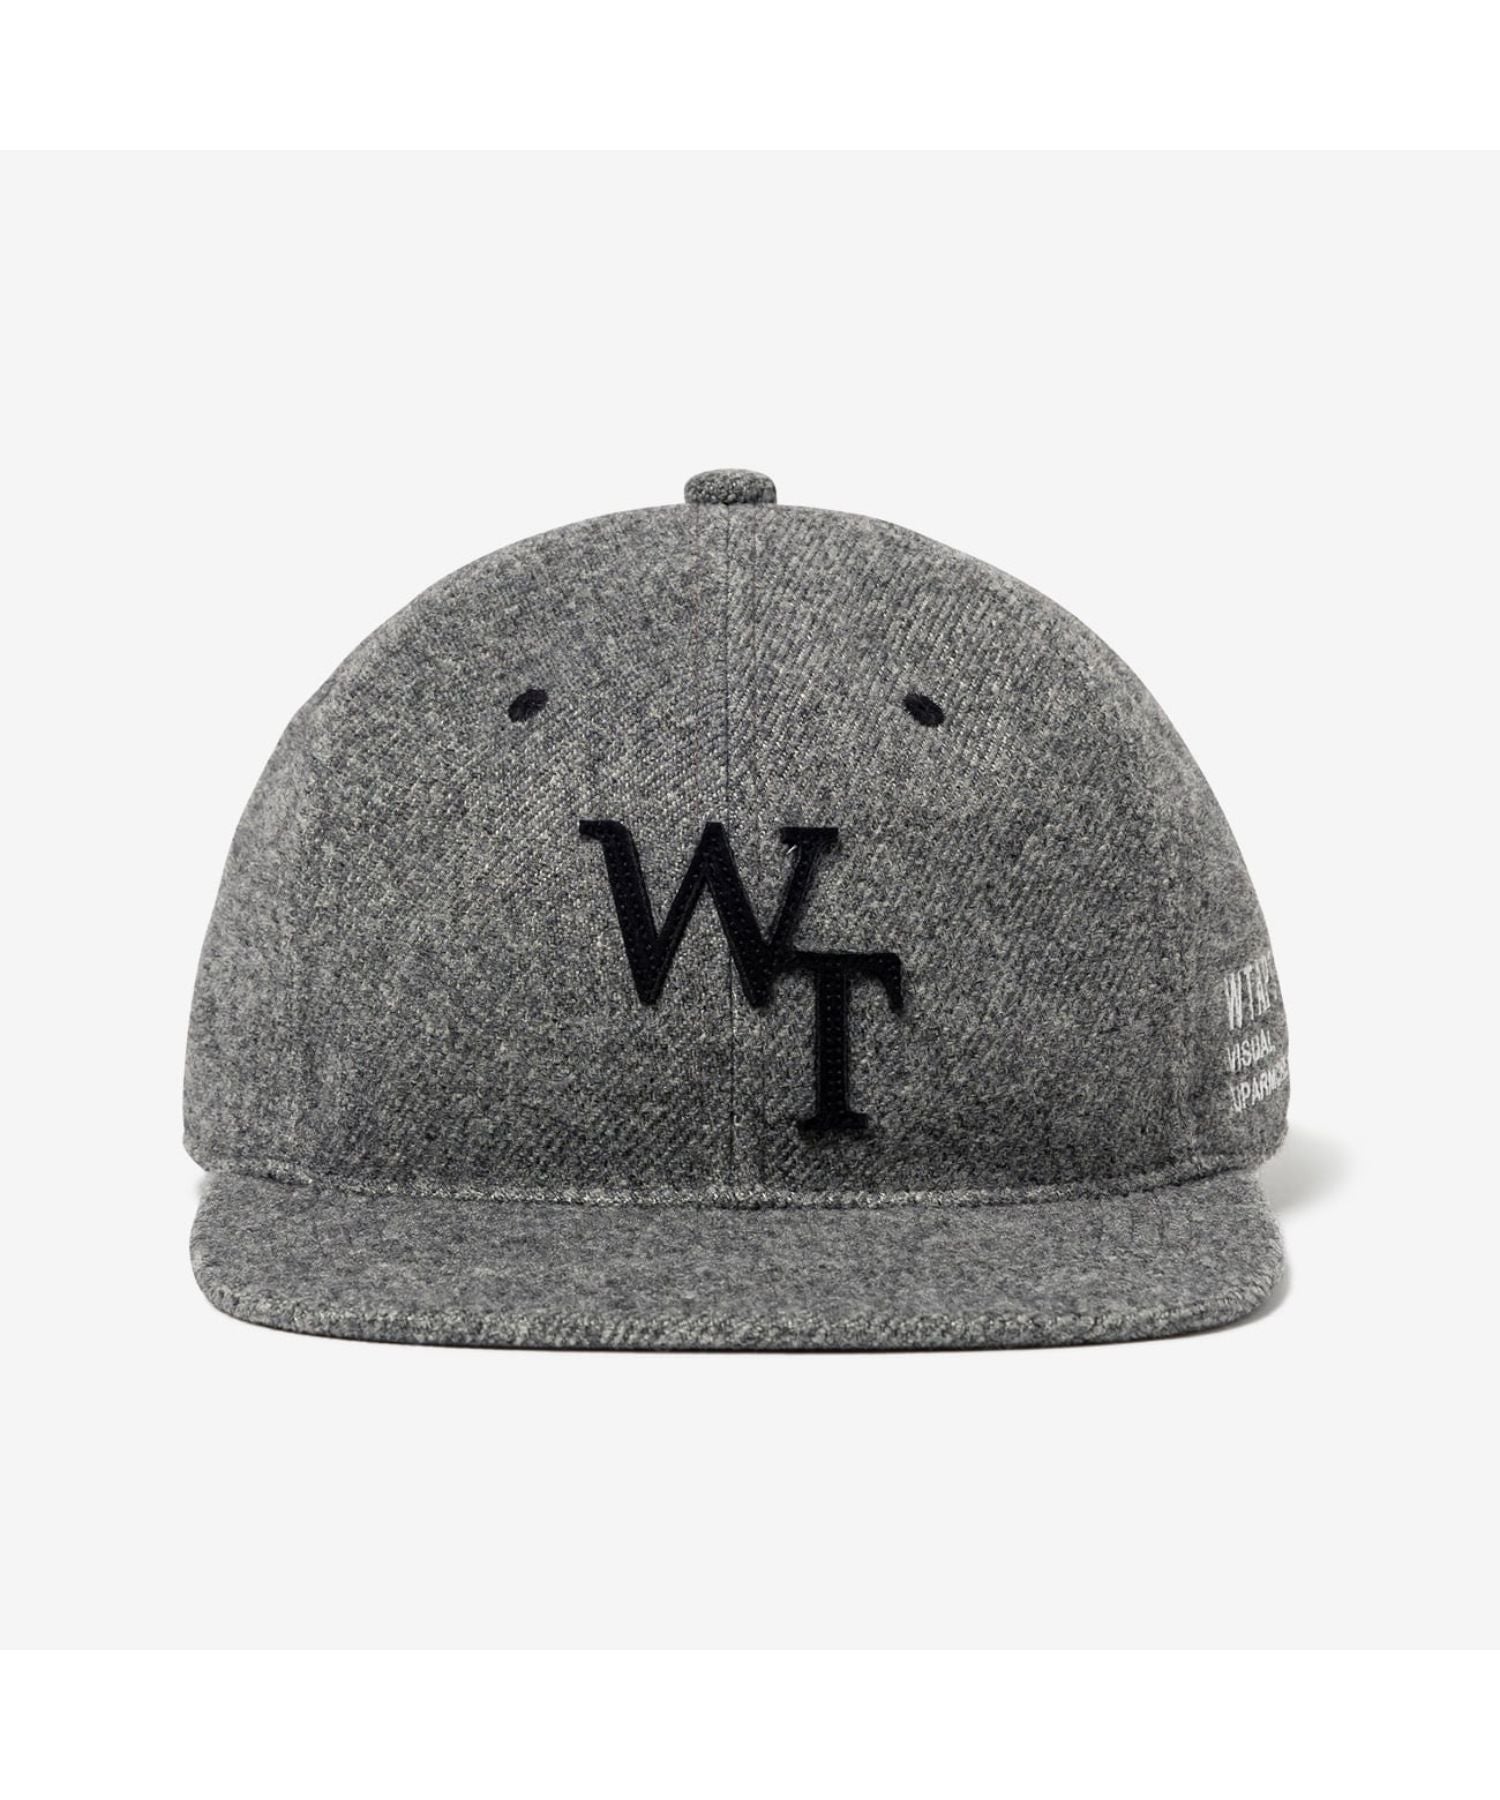 T-6H / CAP / POLY. TWILL. LEAGUEGRAY